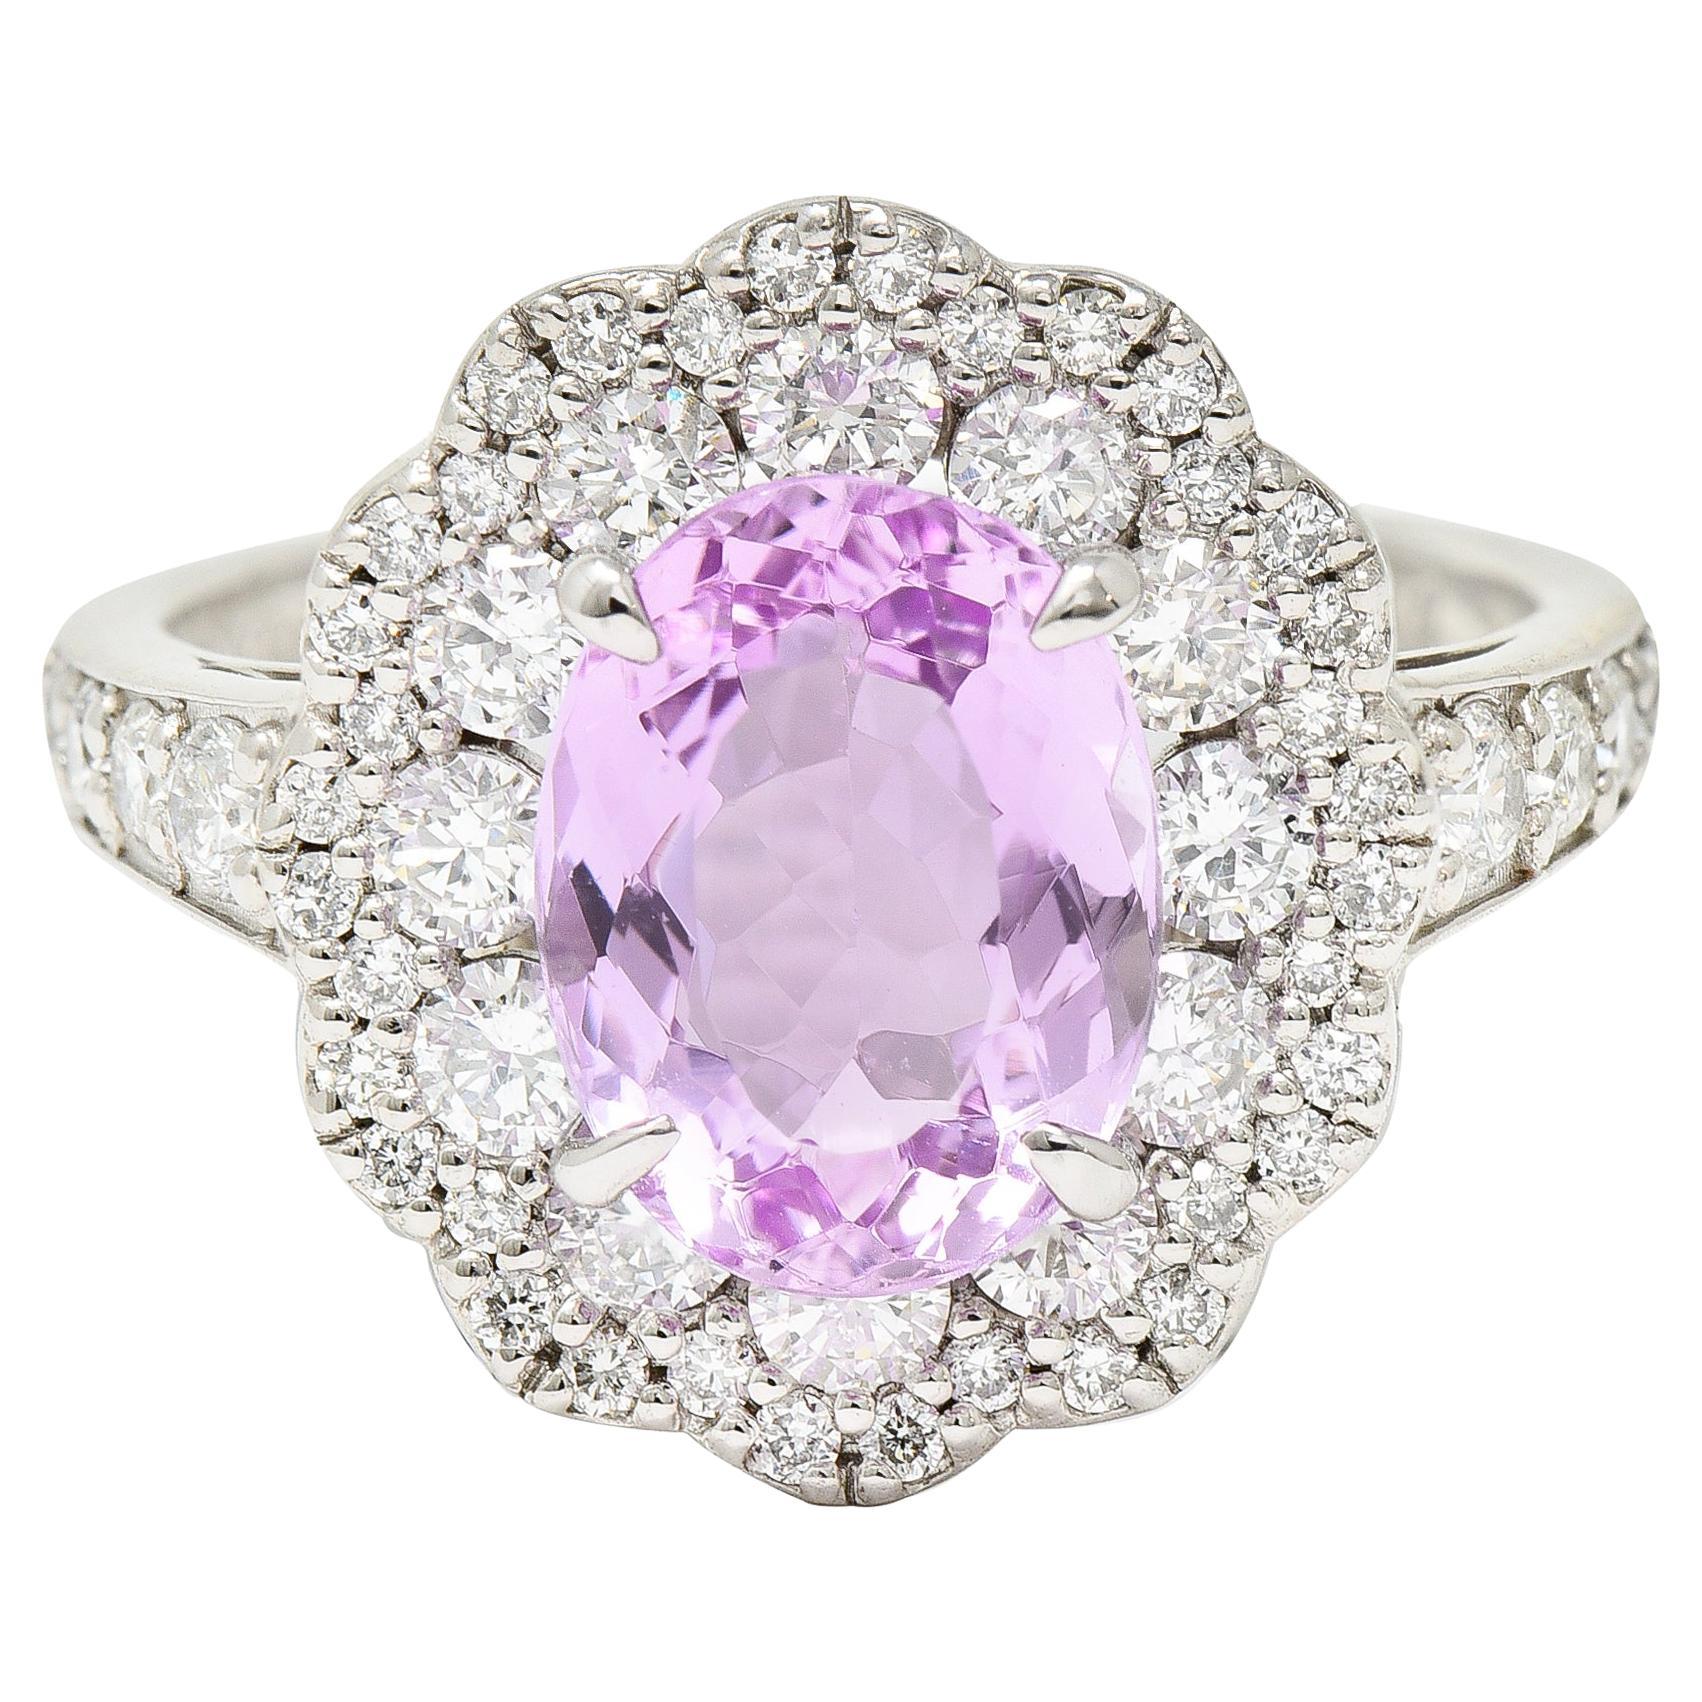 Contemporary 3.88 Carats Pink Topaz Diamond Platinum Floral Cluster Ring